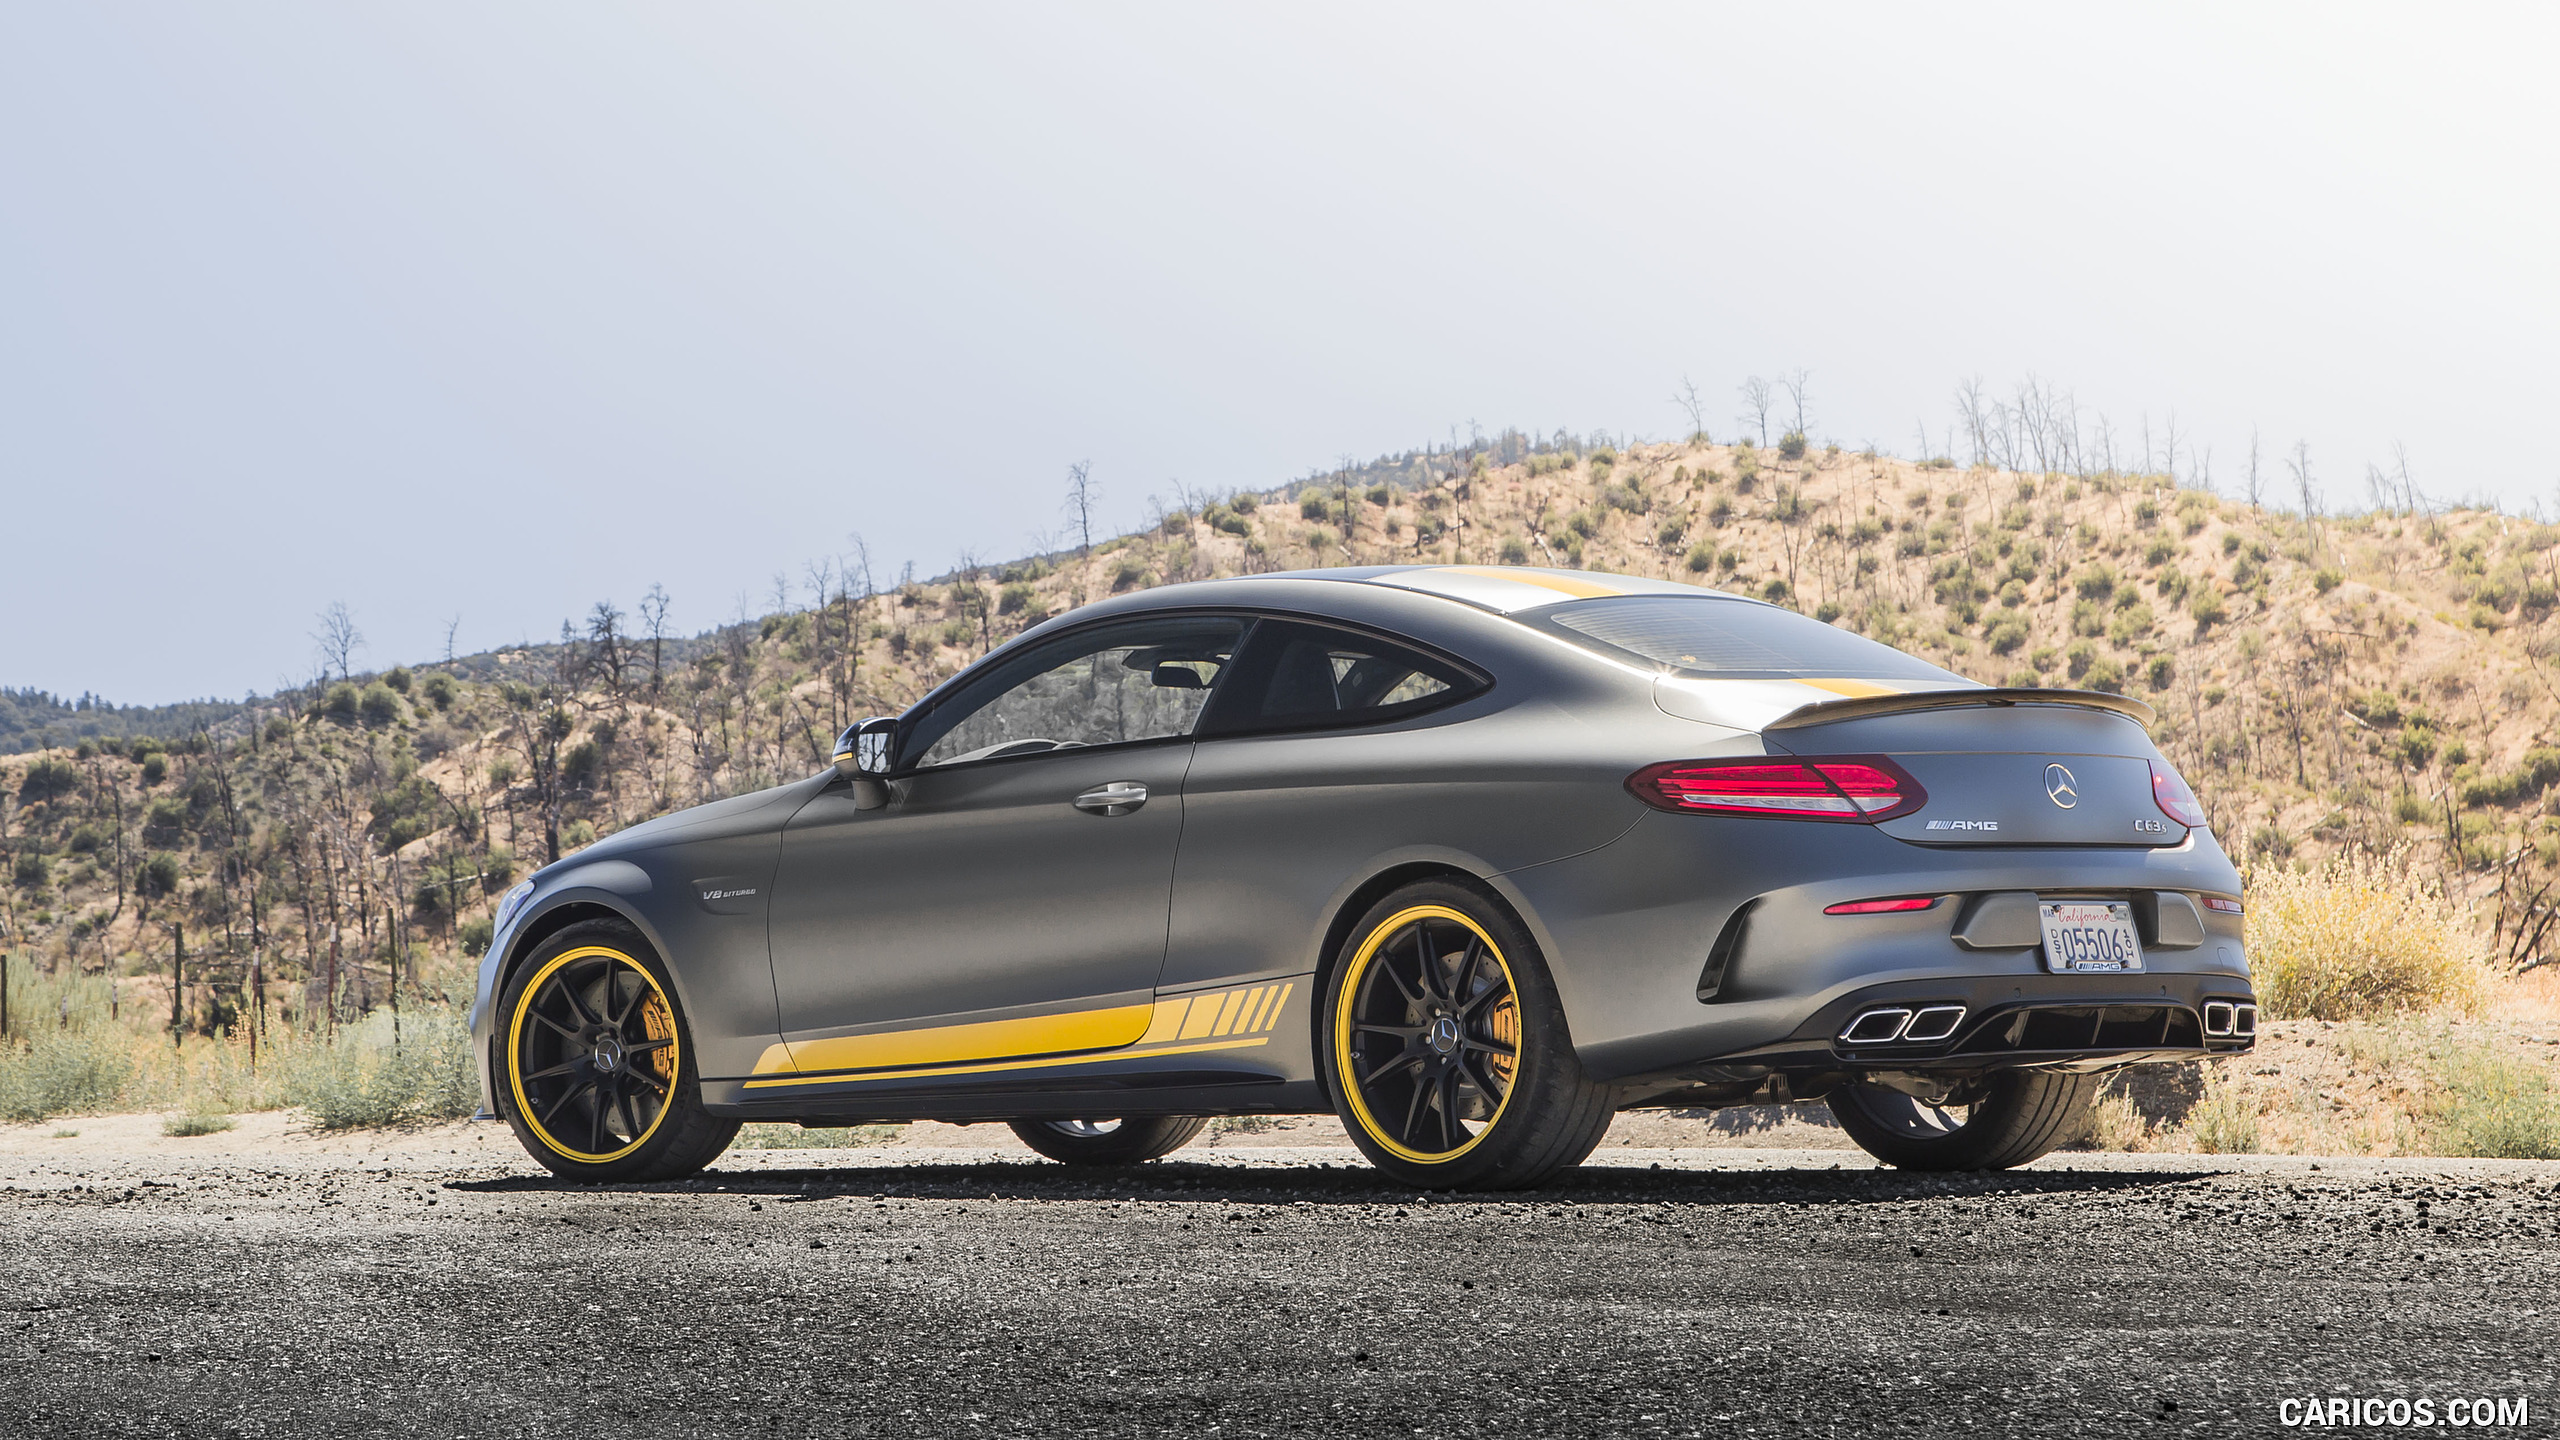 2017 Mercedes-AMG C63 S Coupe Edition One (US-Spec) - Rear Three-Quarter, #15 of 86